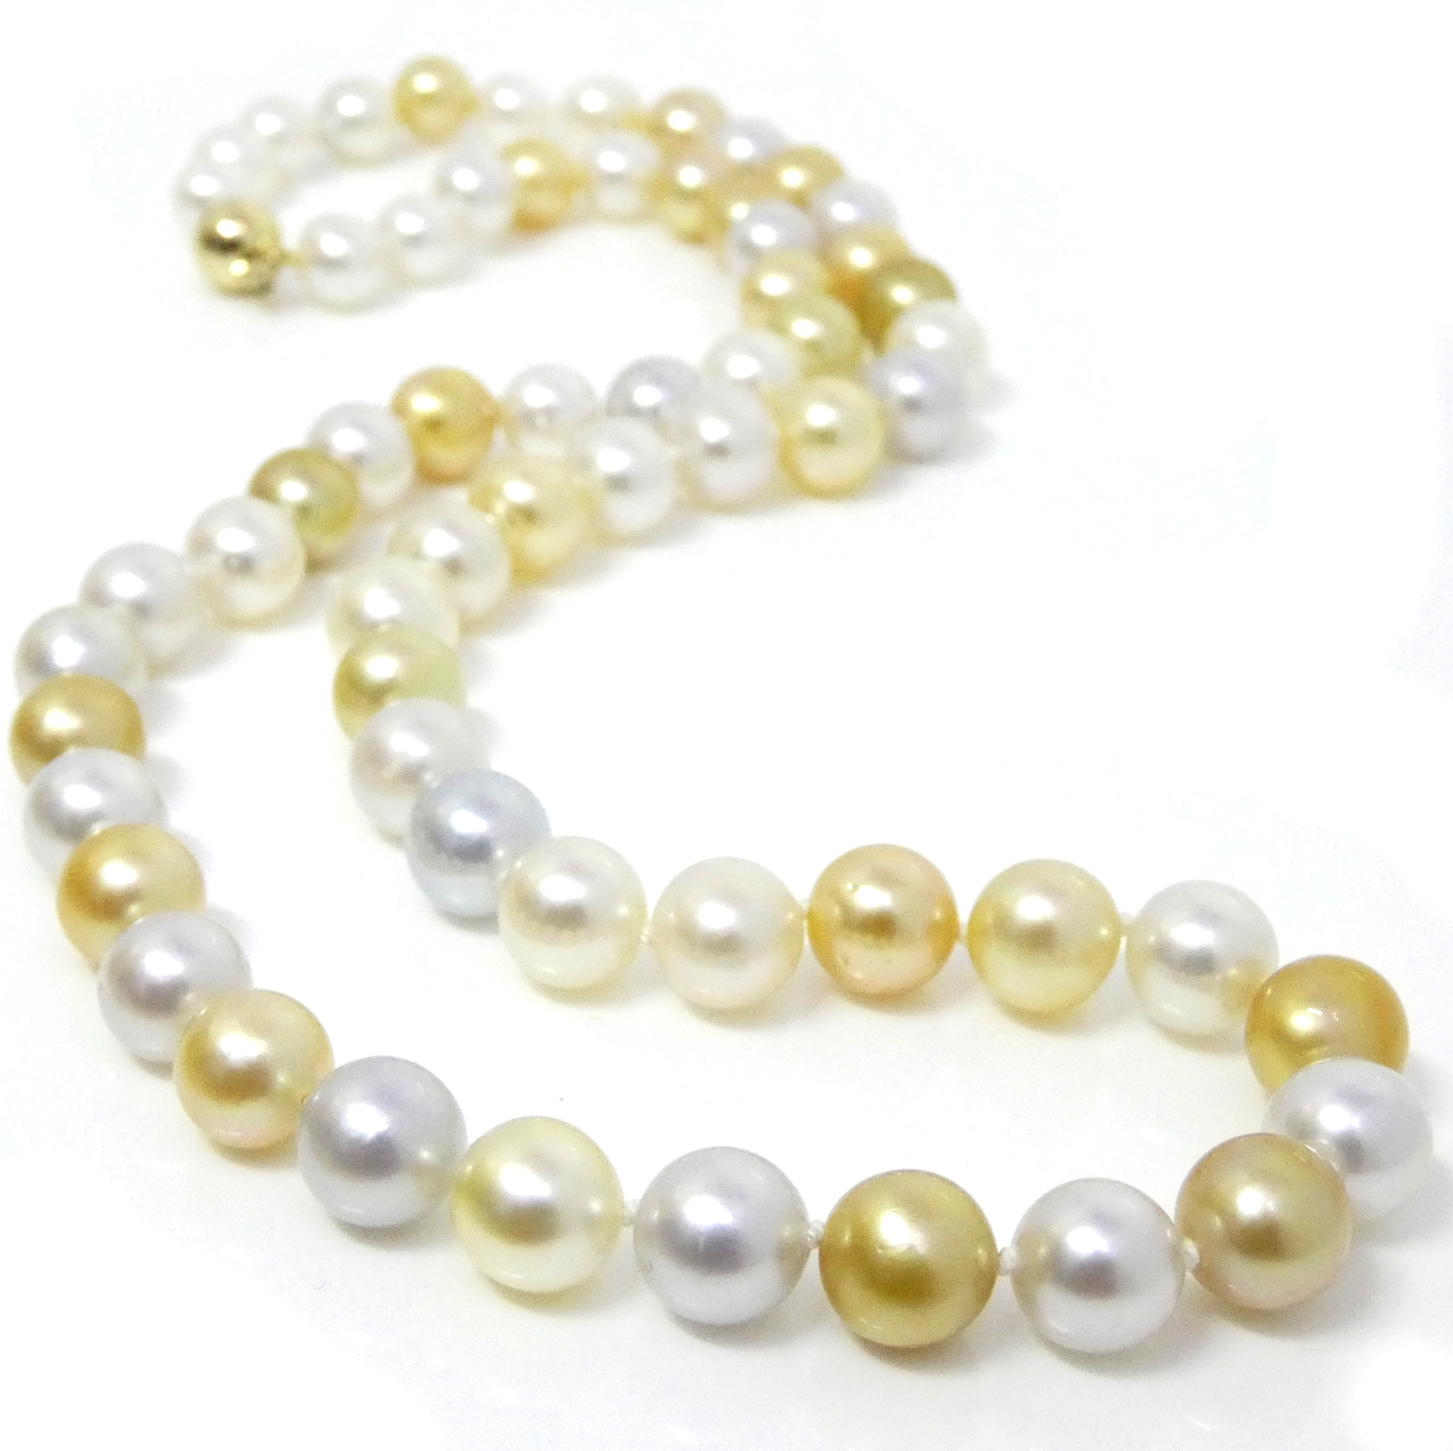 Mixed White and Gold South Sea \'Pelosi\' Pearl Necklace